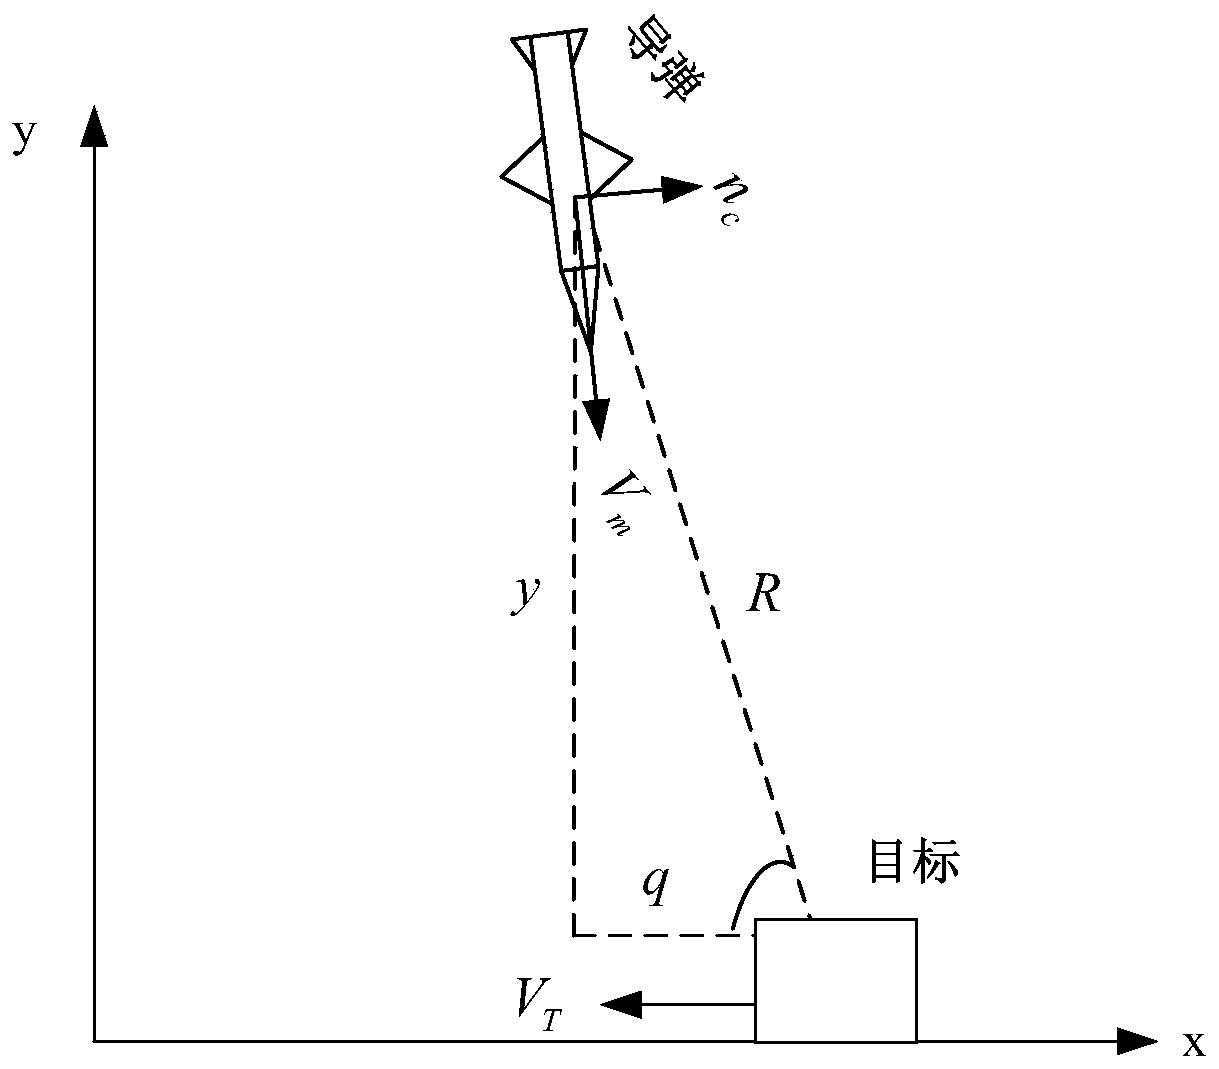 Missile control method based on to-ground perpendicular strike guidance law